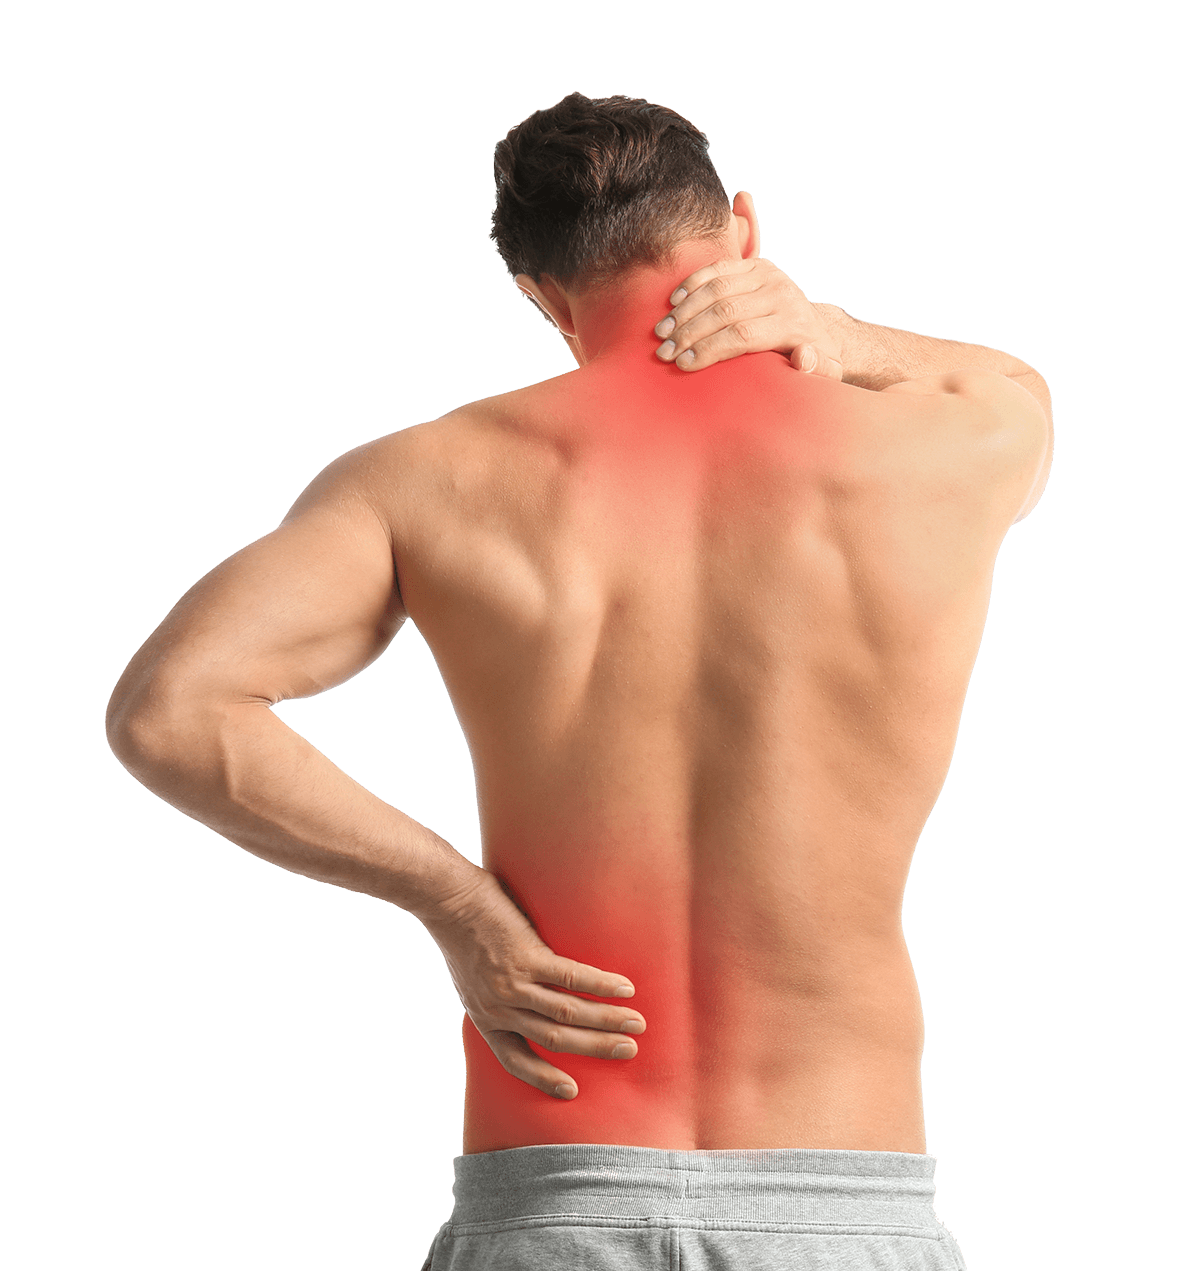 Chronic pain in neck and lower back